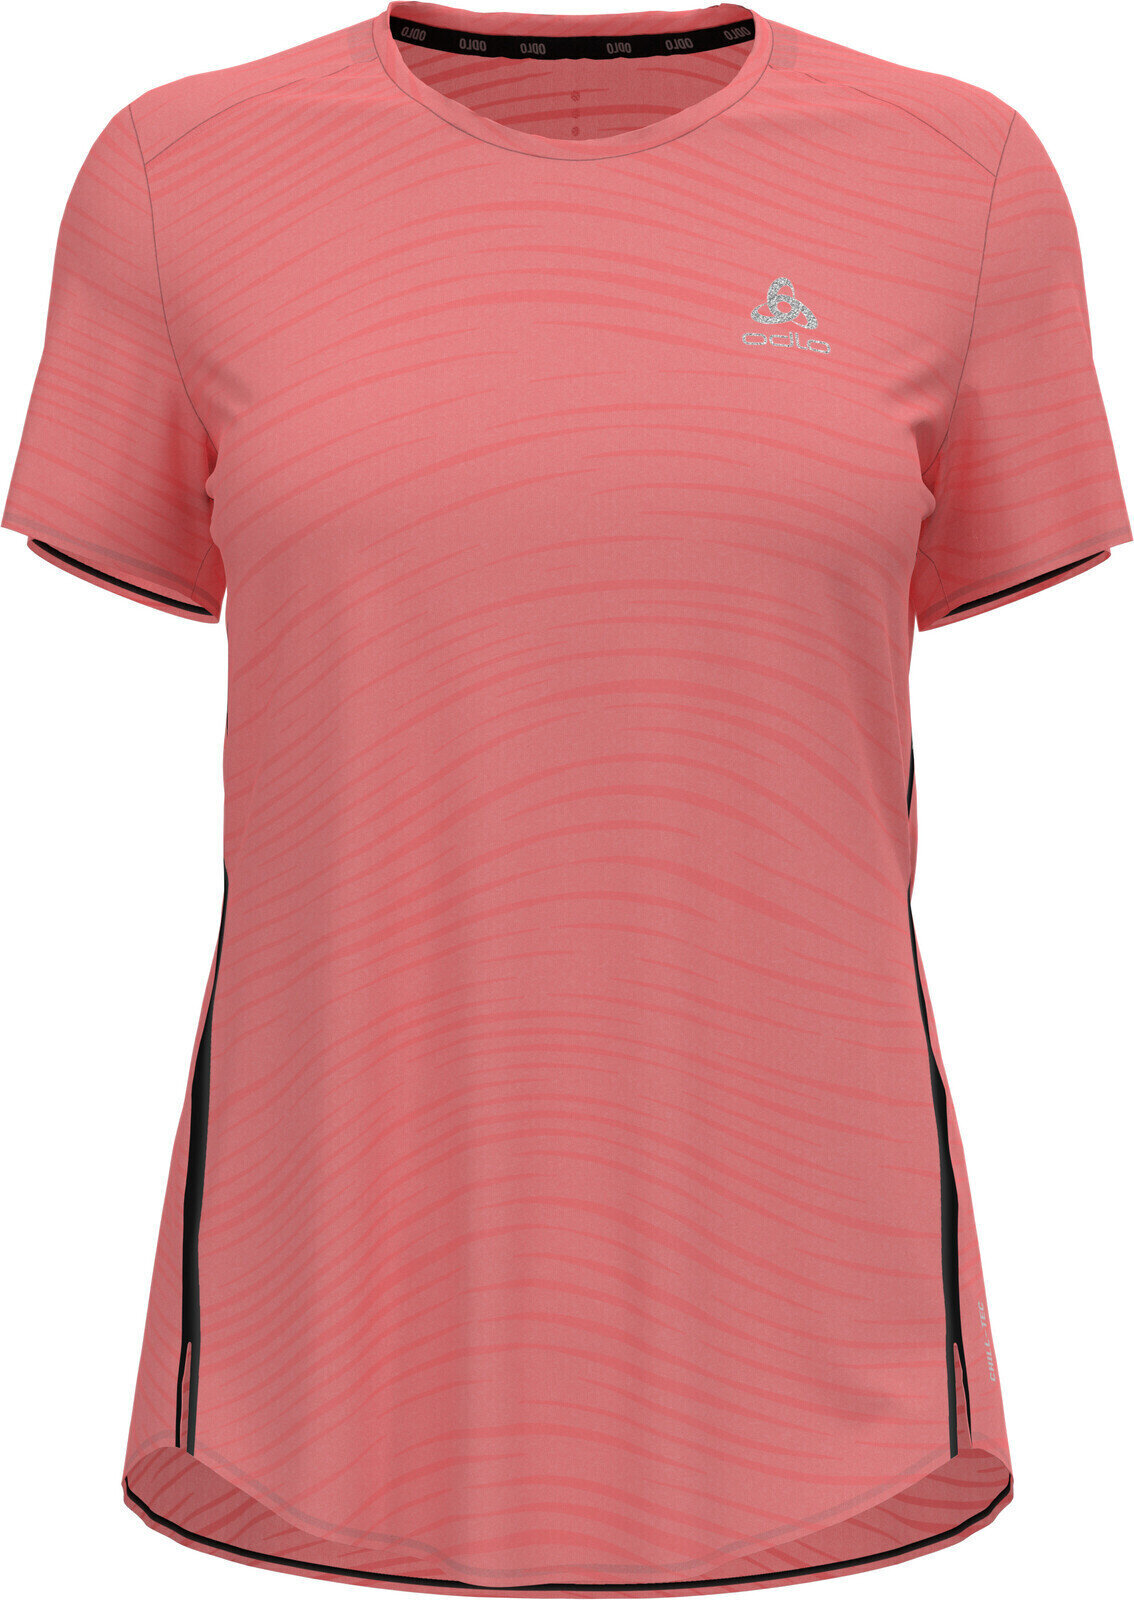 Chemise de course à manches courtes
 Odlo Zeroweight Engineered Chill-Tec T-Shirt Siesta Melange L Chemise de course à manches courtes